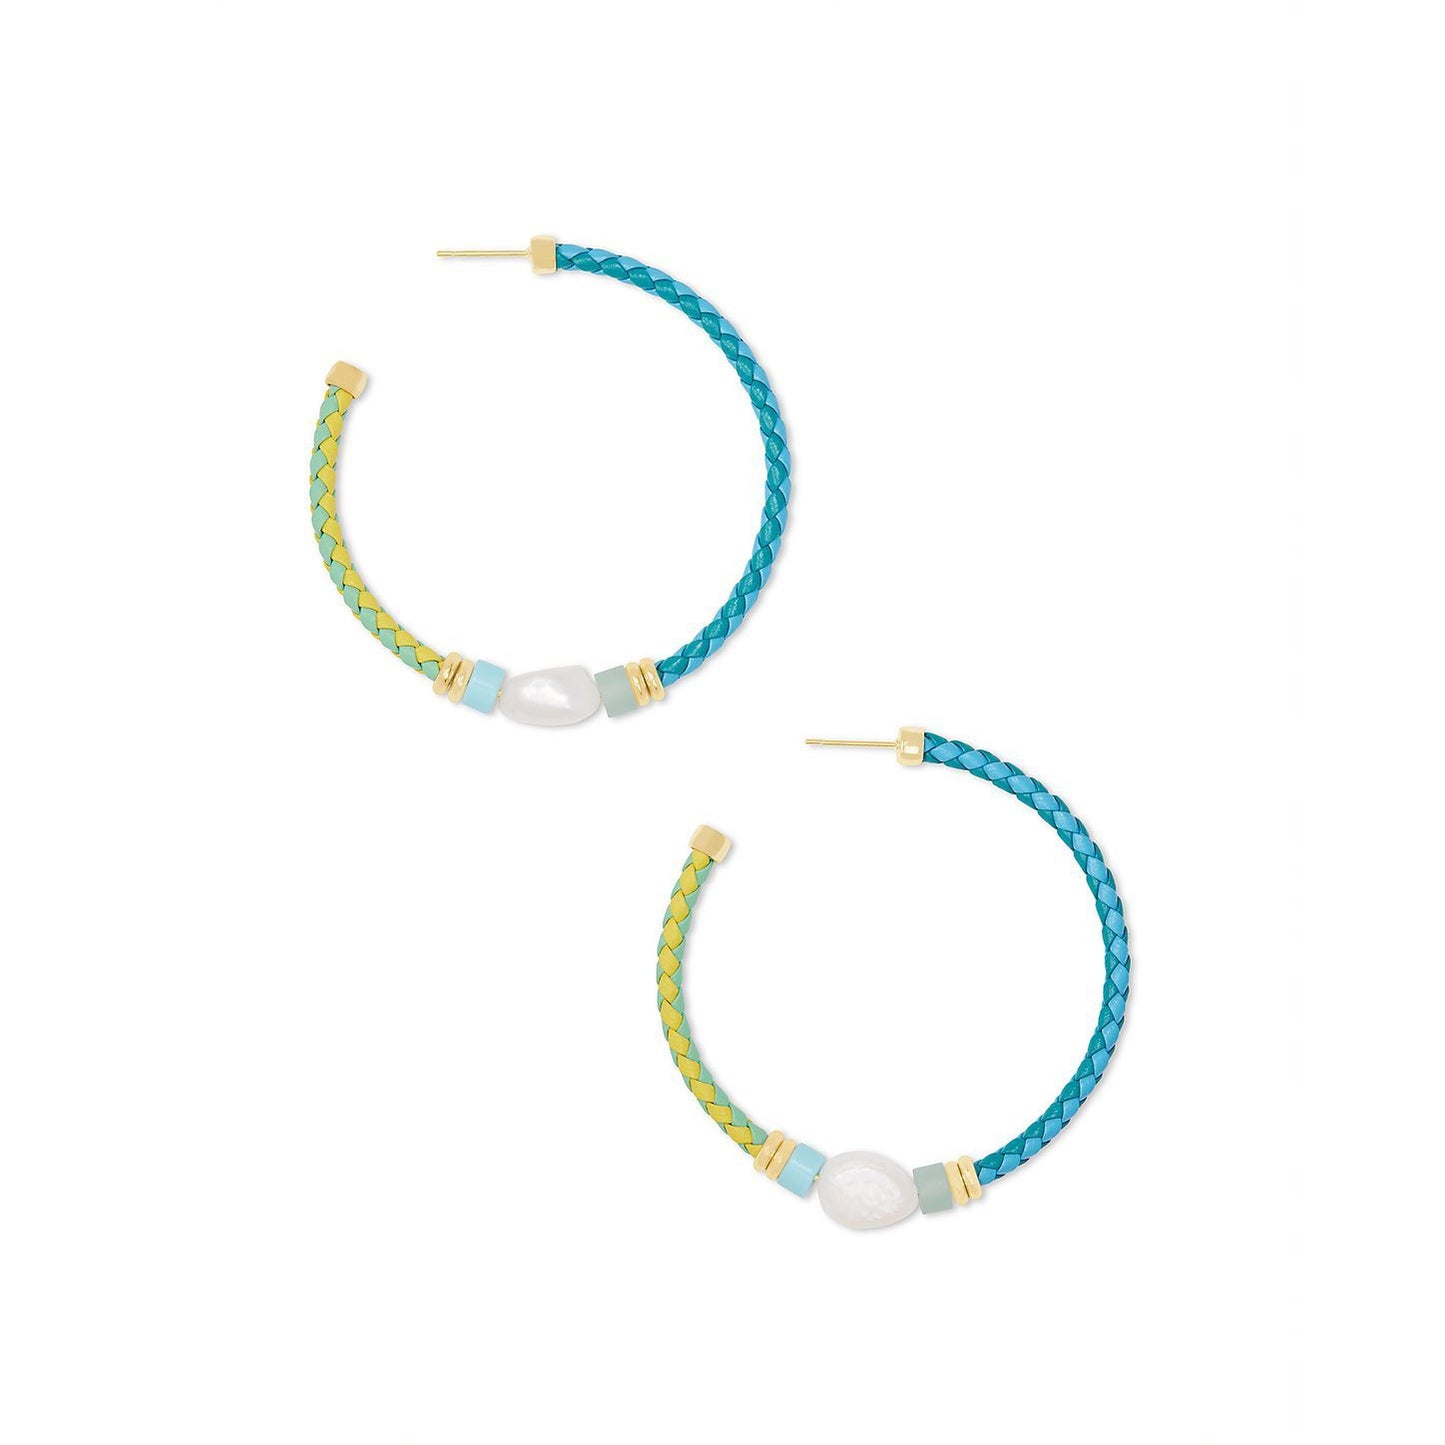 Raven Hoop Earrings in Gold Turquoise Mix